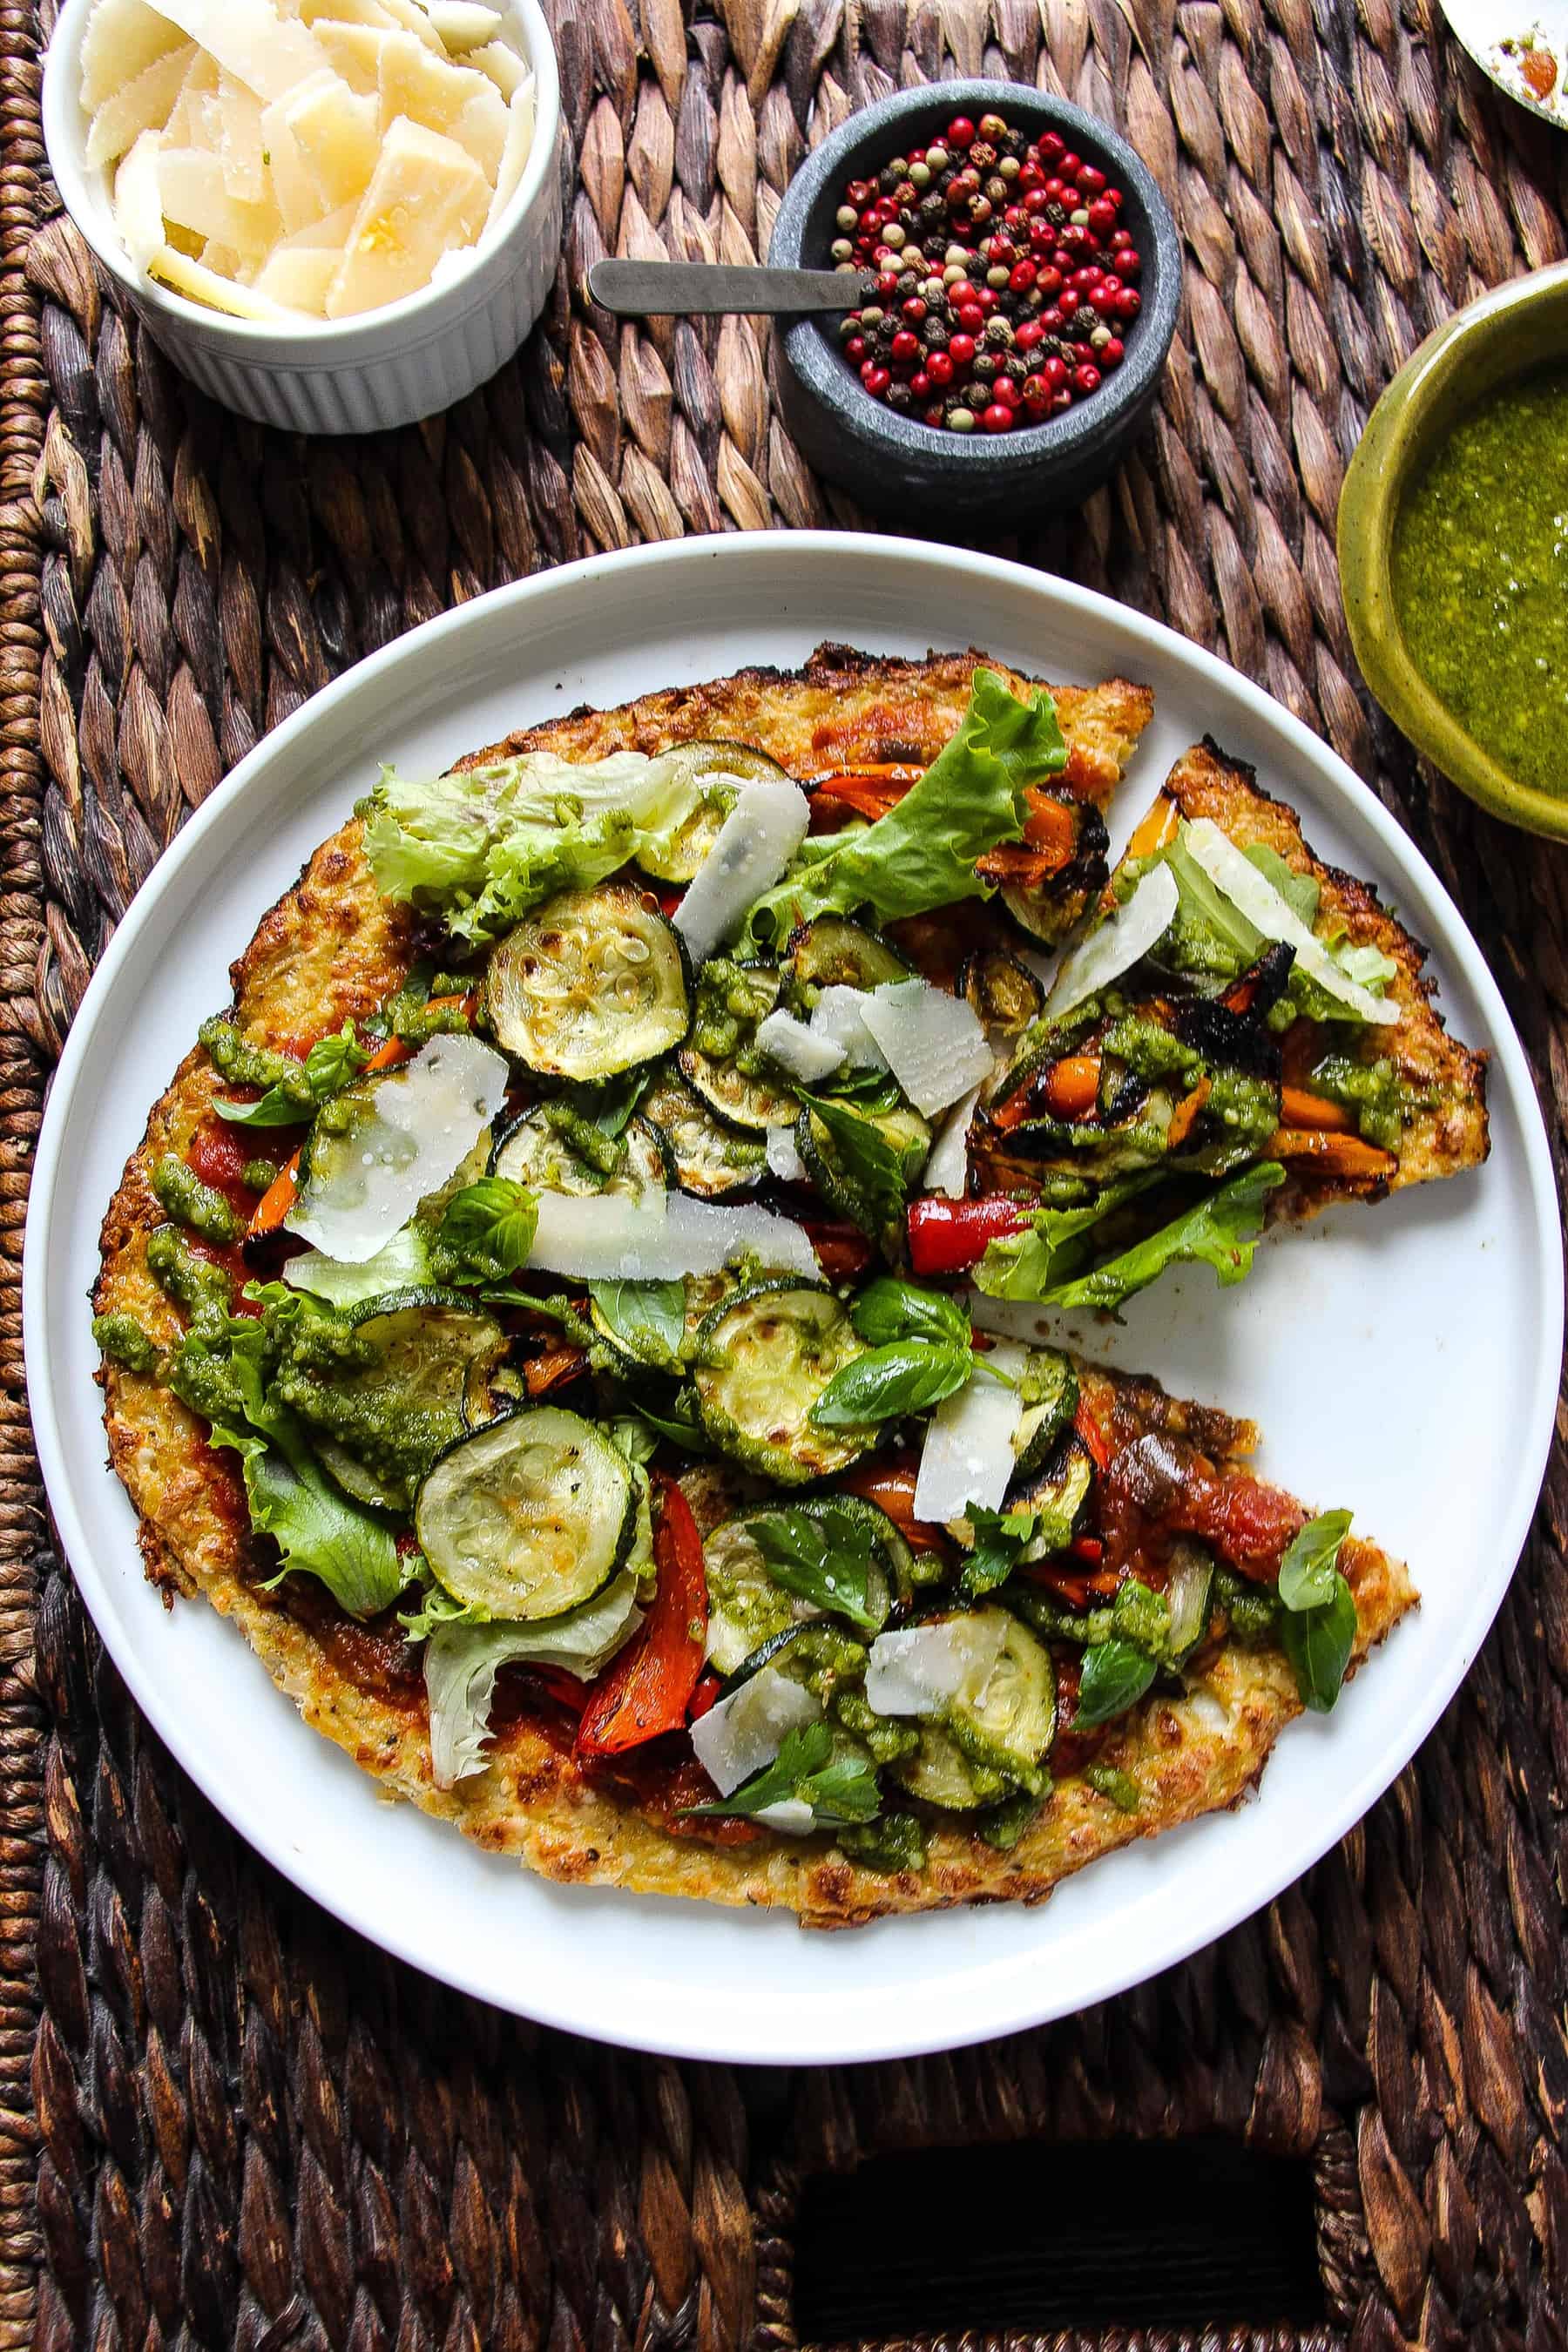 Perfect cauliflower crust with roasted vegetables and basil pesto